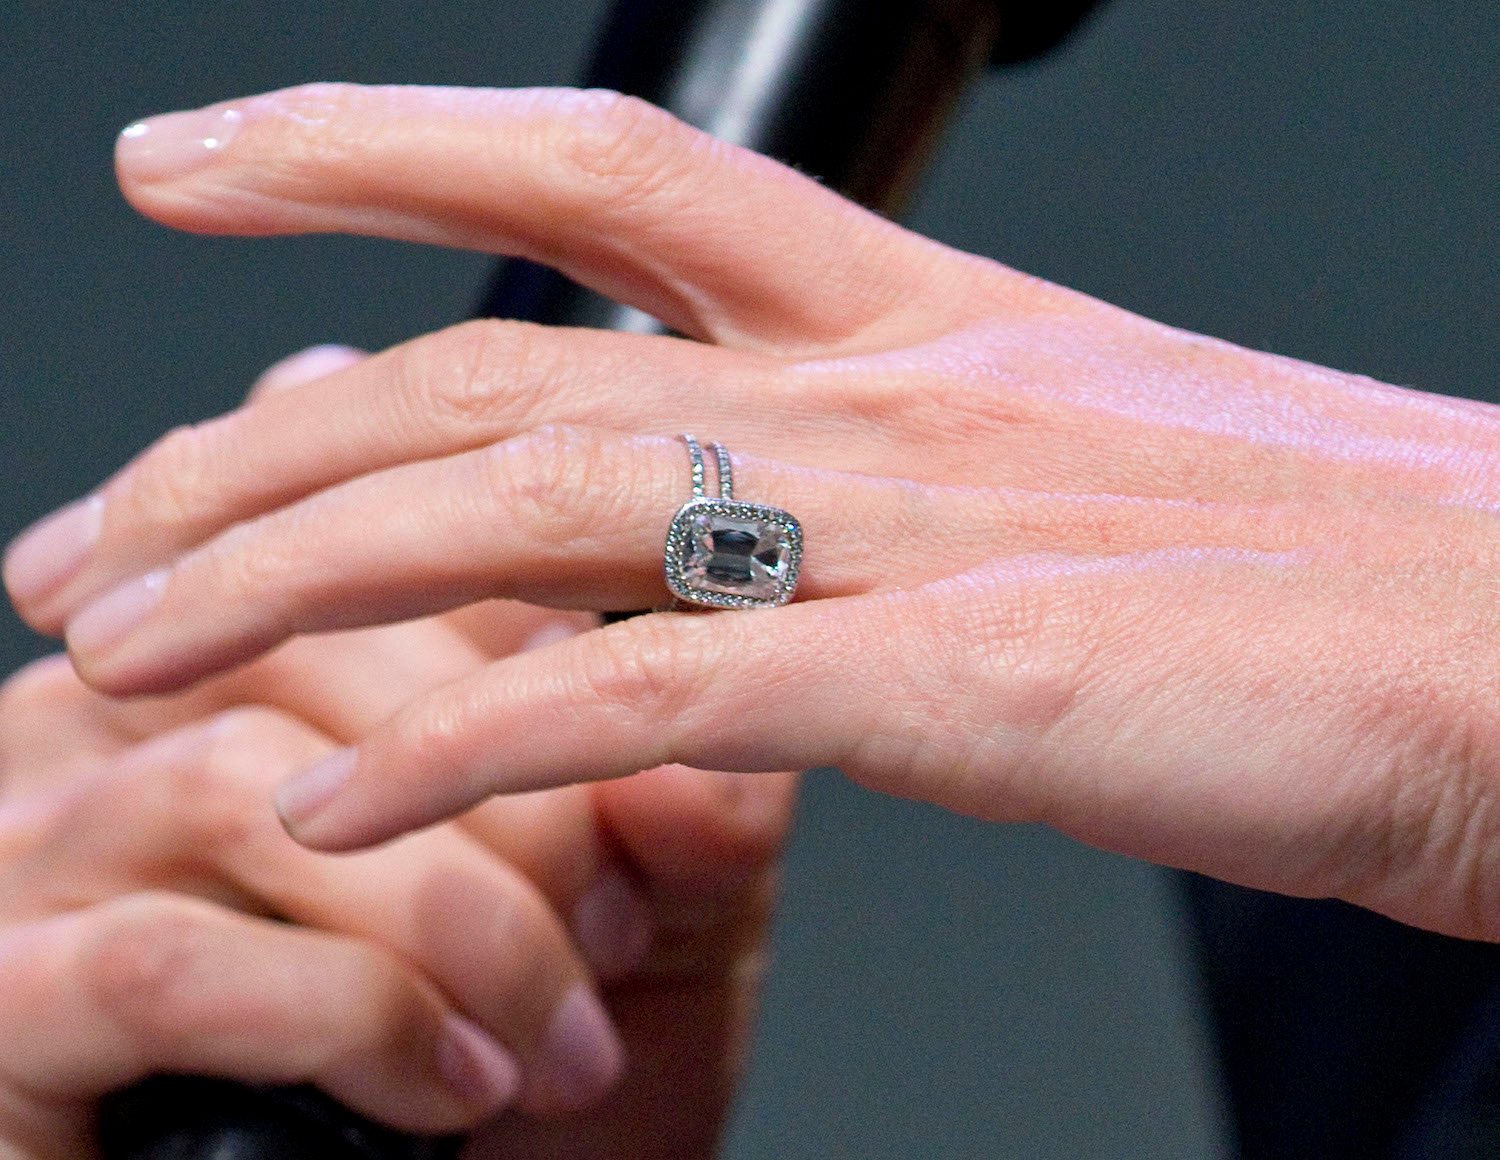 A closeup of Gwyneth Paltrow's hand with her engagement ring from Chris Martin.